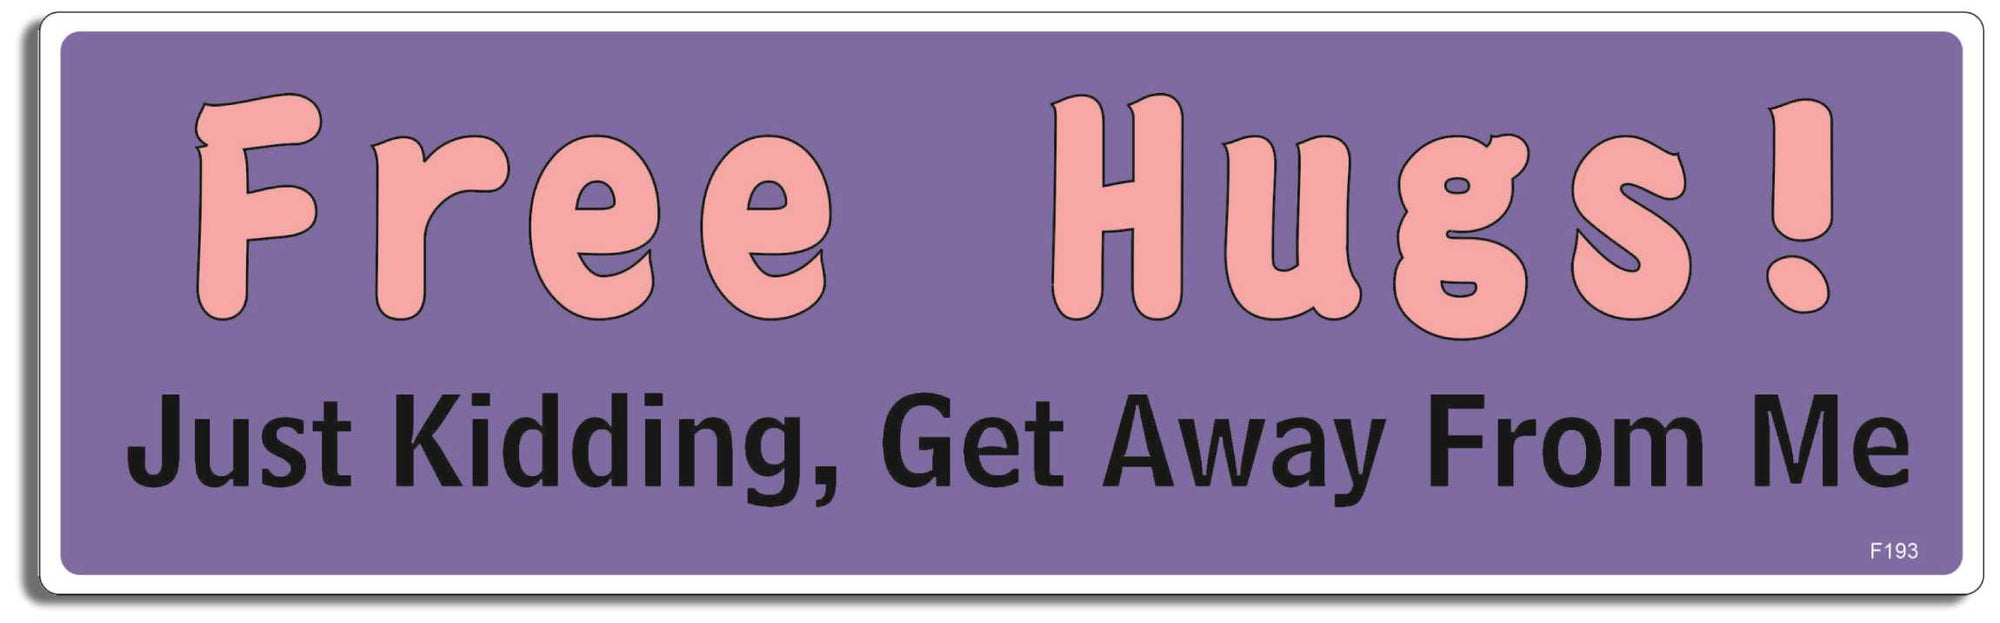 Free Hugs! Just Kidding, Get Away From Me  -  3" x 10" -  Decal Bumper Sticker-funny Bumper Sticker Car Magnet Free Hugs! Just Kidding, Get Away-  Decal for cars funny quote, puns, sarcastic